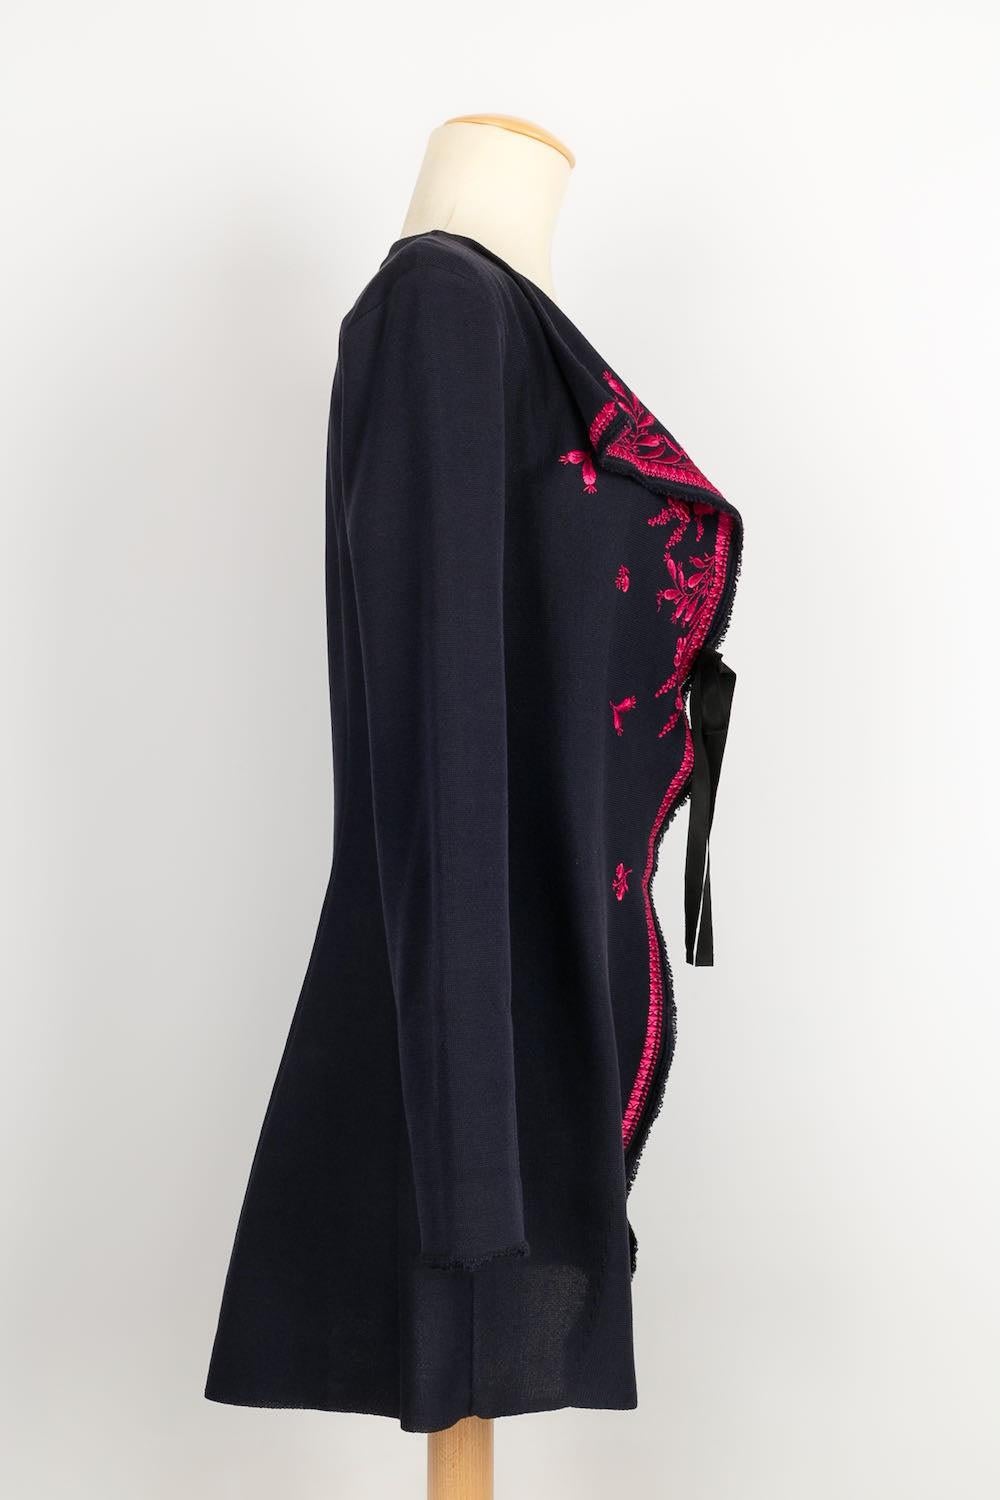 Women's Christian Dior Jacket Embroidered with Pink Floral Pattern For Sale